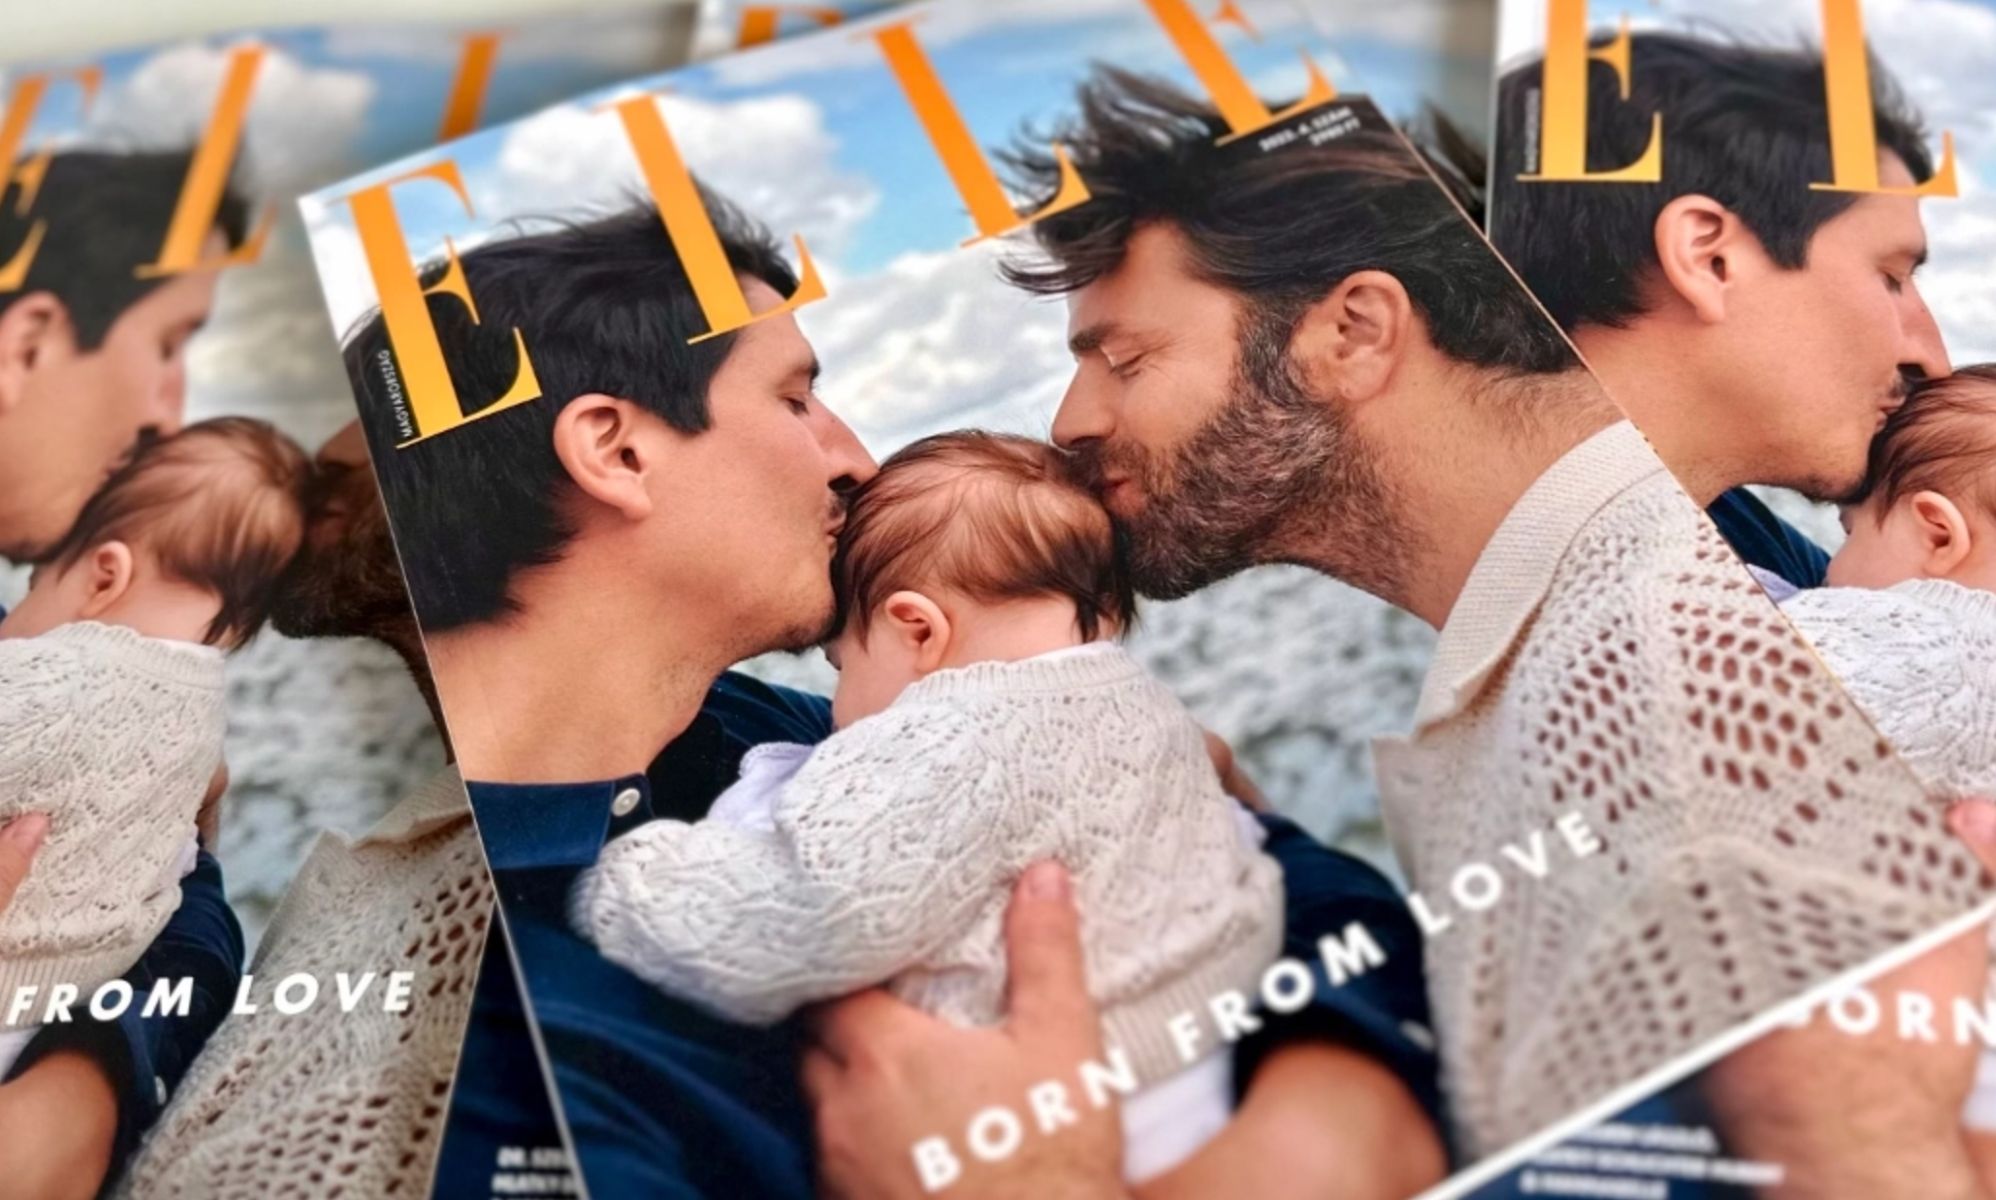 Elle Hungary puts gay dads on cover in defiant display of allyship picture